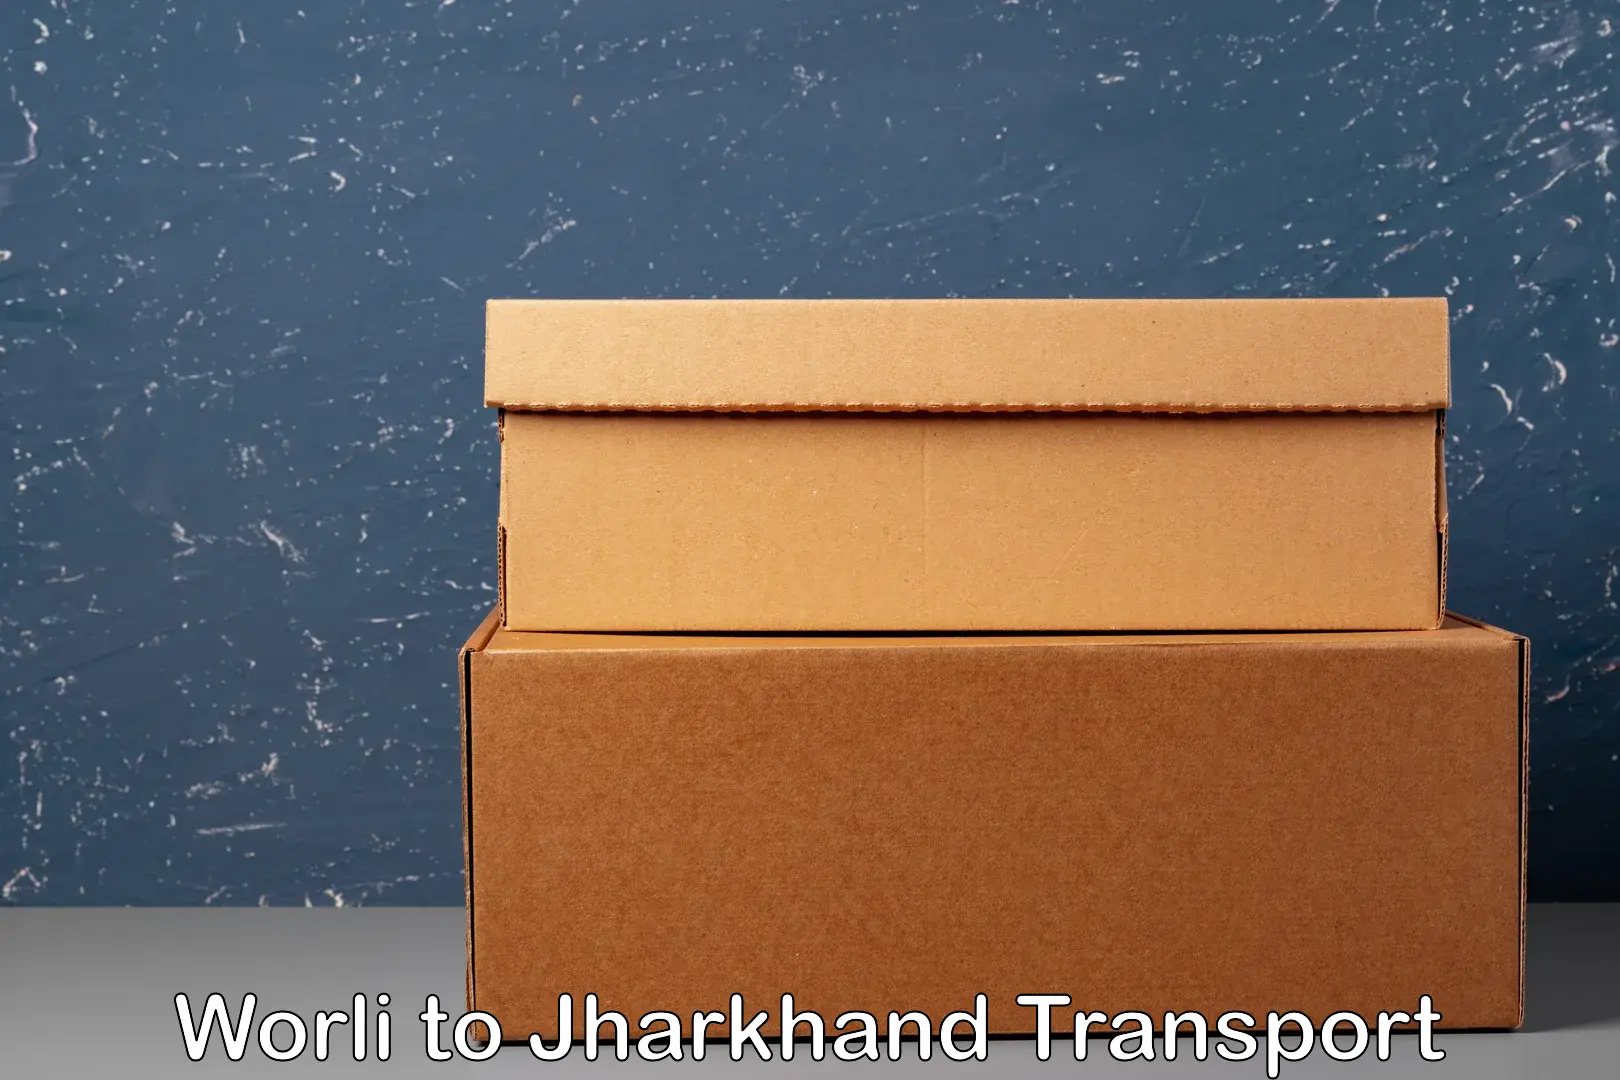 Package delivery services Worli to Dhalbhumgarh